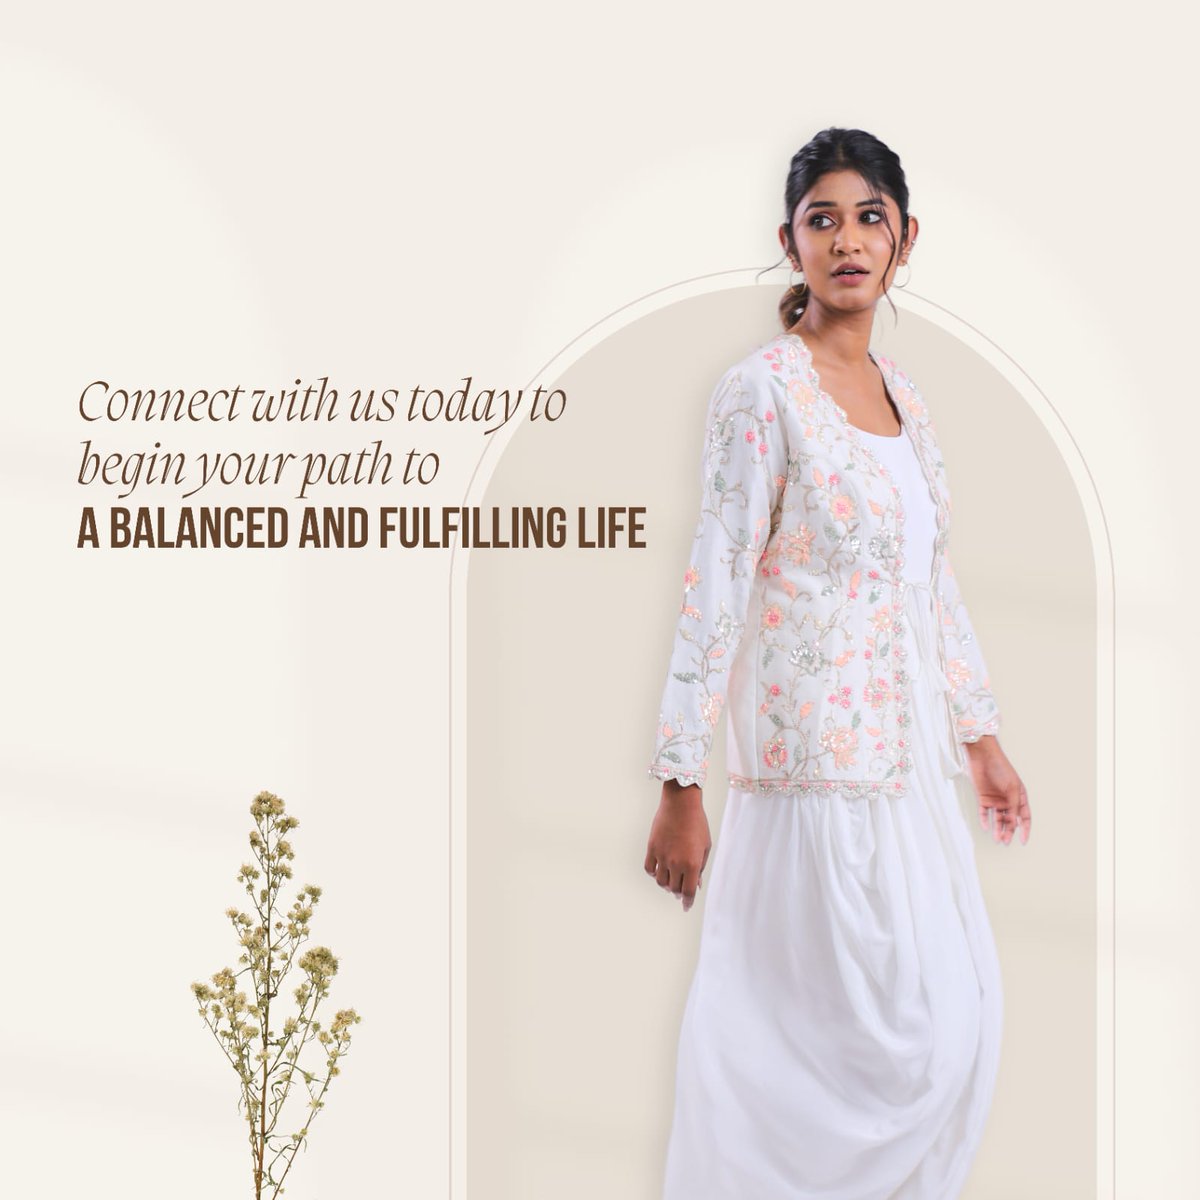 Unlock your potential with #AagamanSutra's #TrinityConsultancy. Personal growth, career success, emotional peace – we've got you covered. Connect with us today for a fulfilling life. #Guidance #ConsultingSolutions #spiritual #spiritualfashion #pranichealing #spirititualclothing